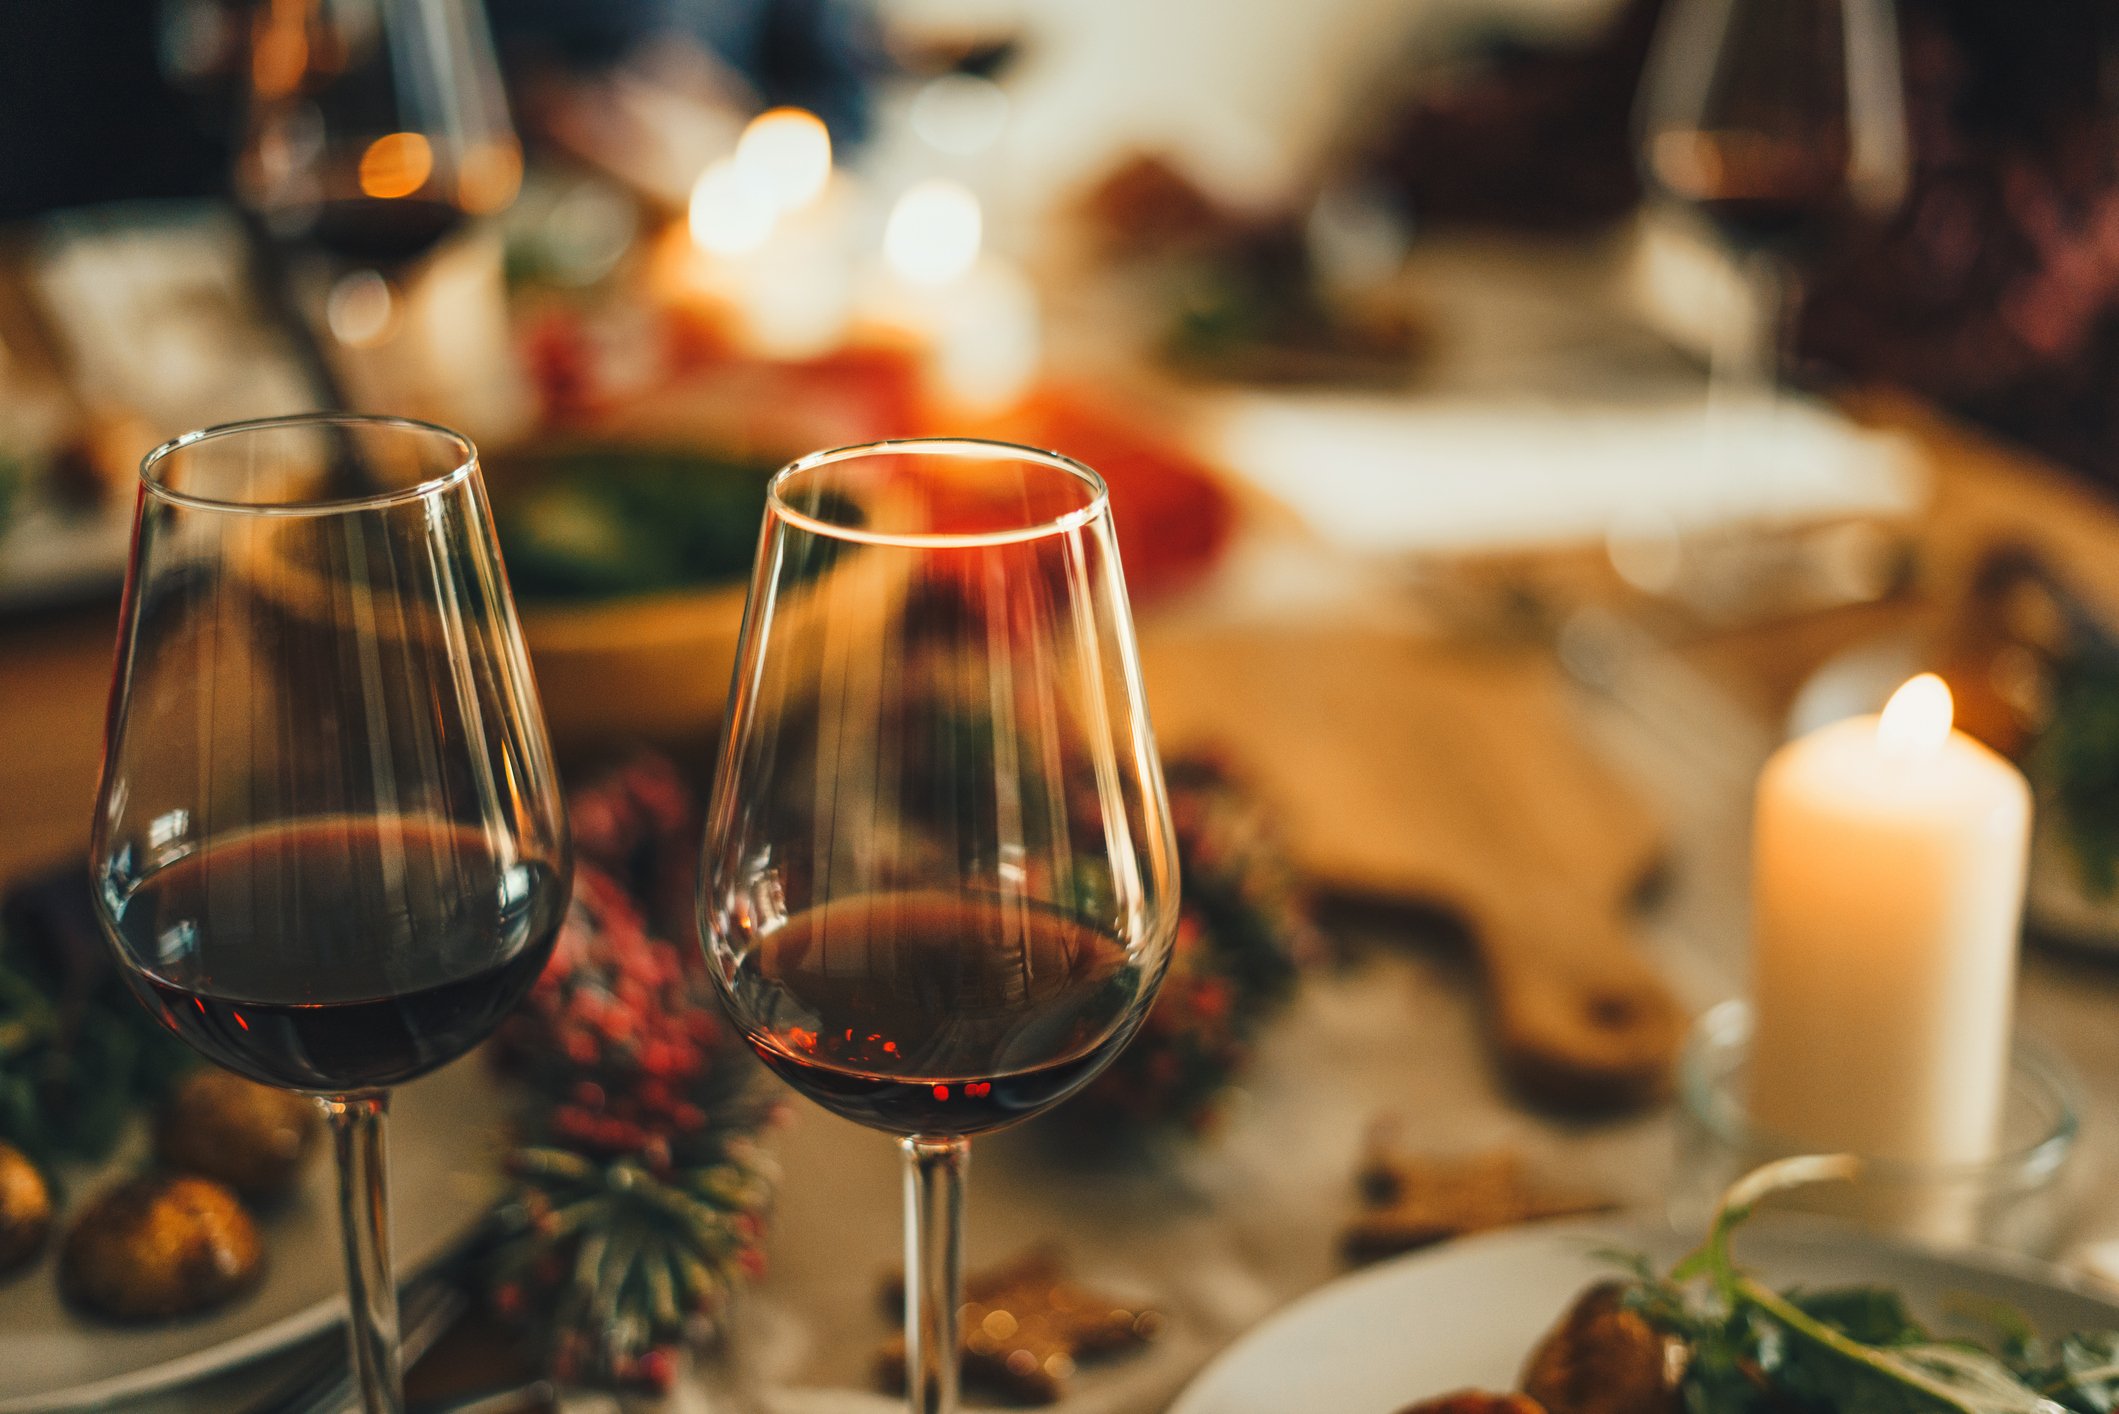 A close up shot of red wine glasses at Christmas dinner table. | Photo: Getty Images